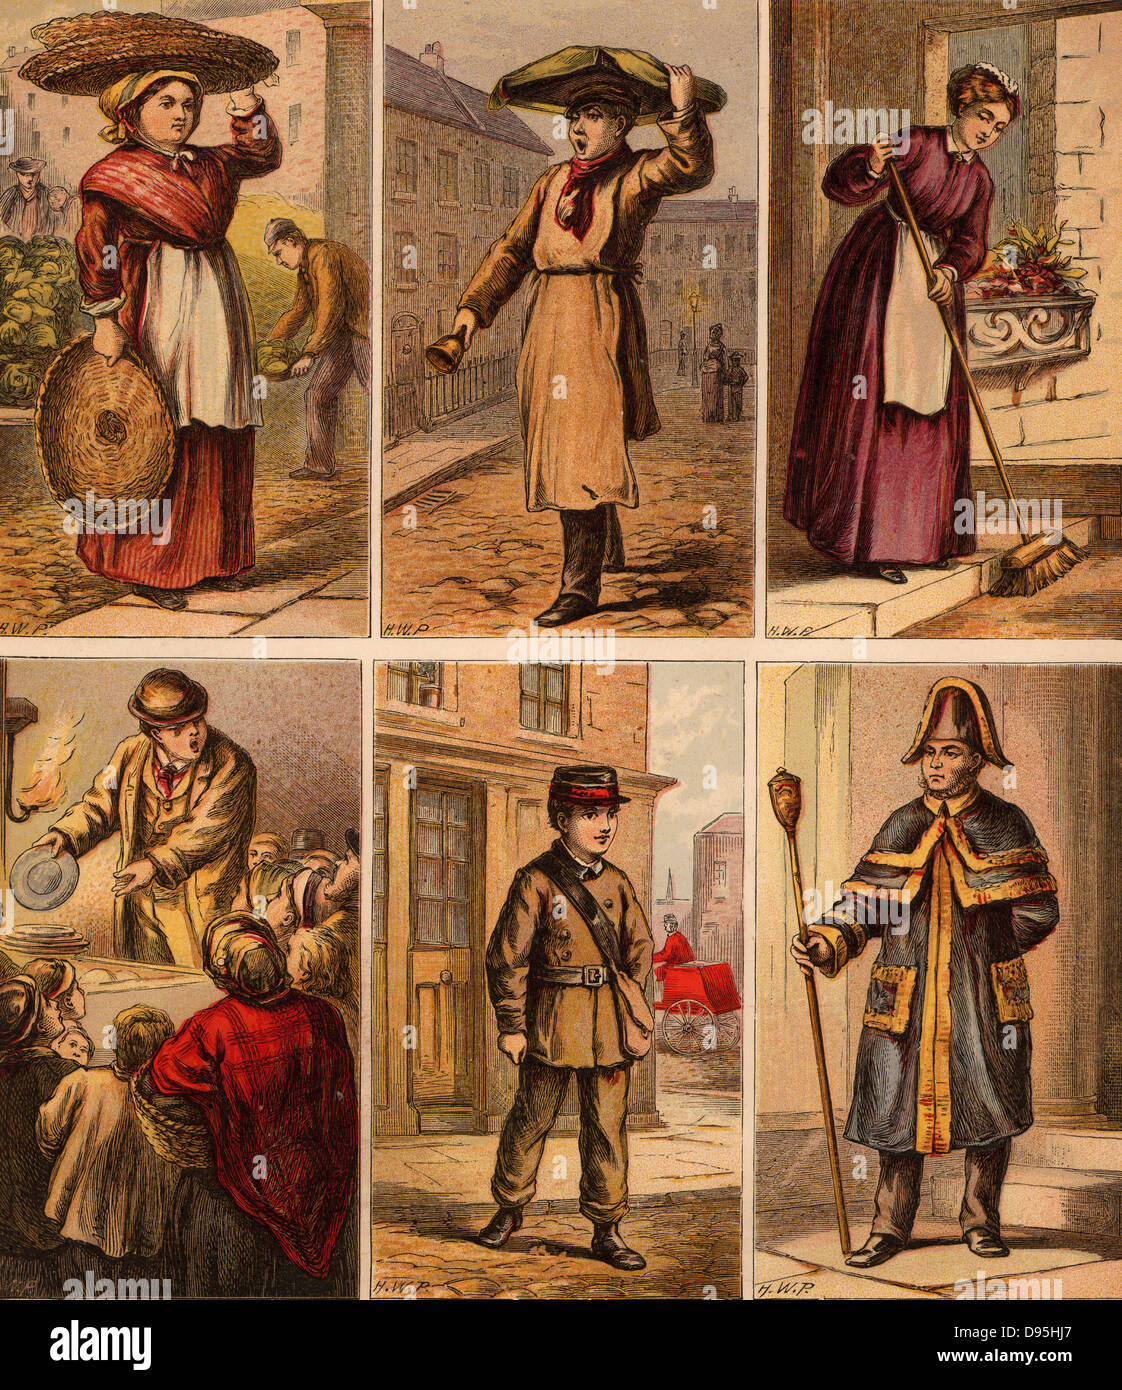 London street scenes. Fish seller: Muffin Man (with bell): Housemaid: Huckster selling crockery: Telegram boy. A Beadle. Illustrations by Horace William Petherick (1839-1919) for a children's book published London c1875. Stock Photo